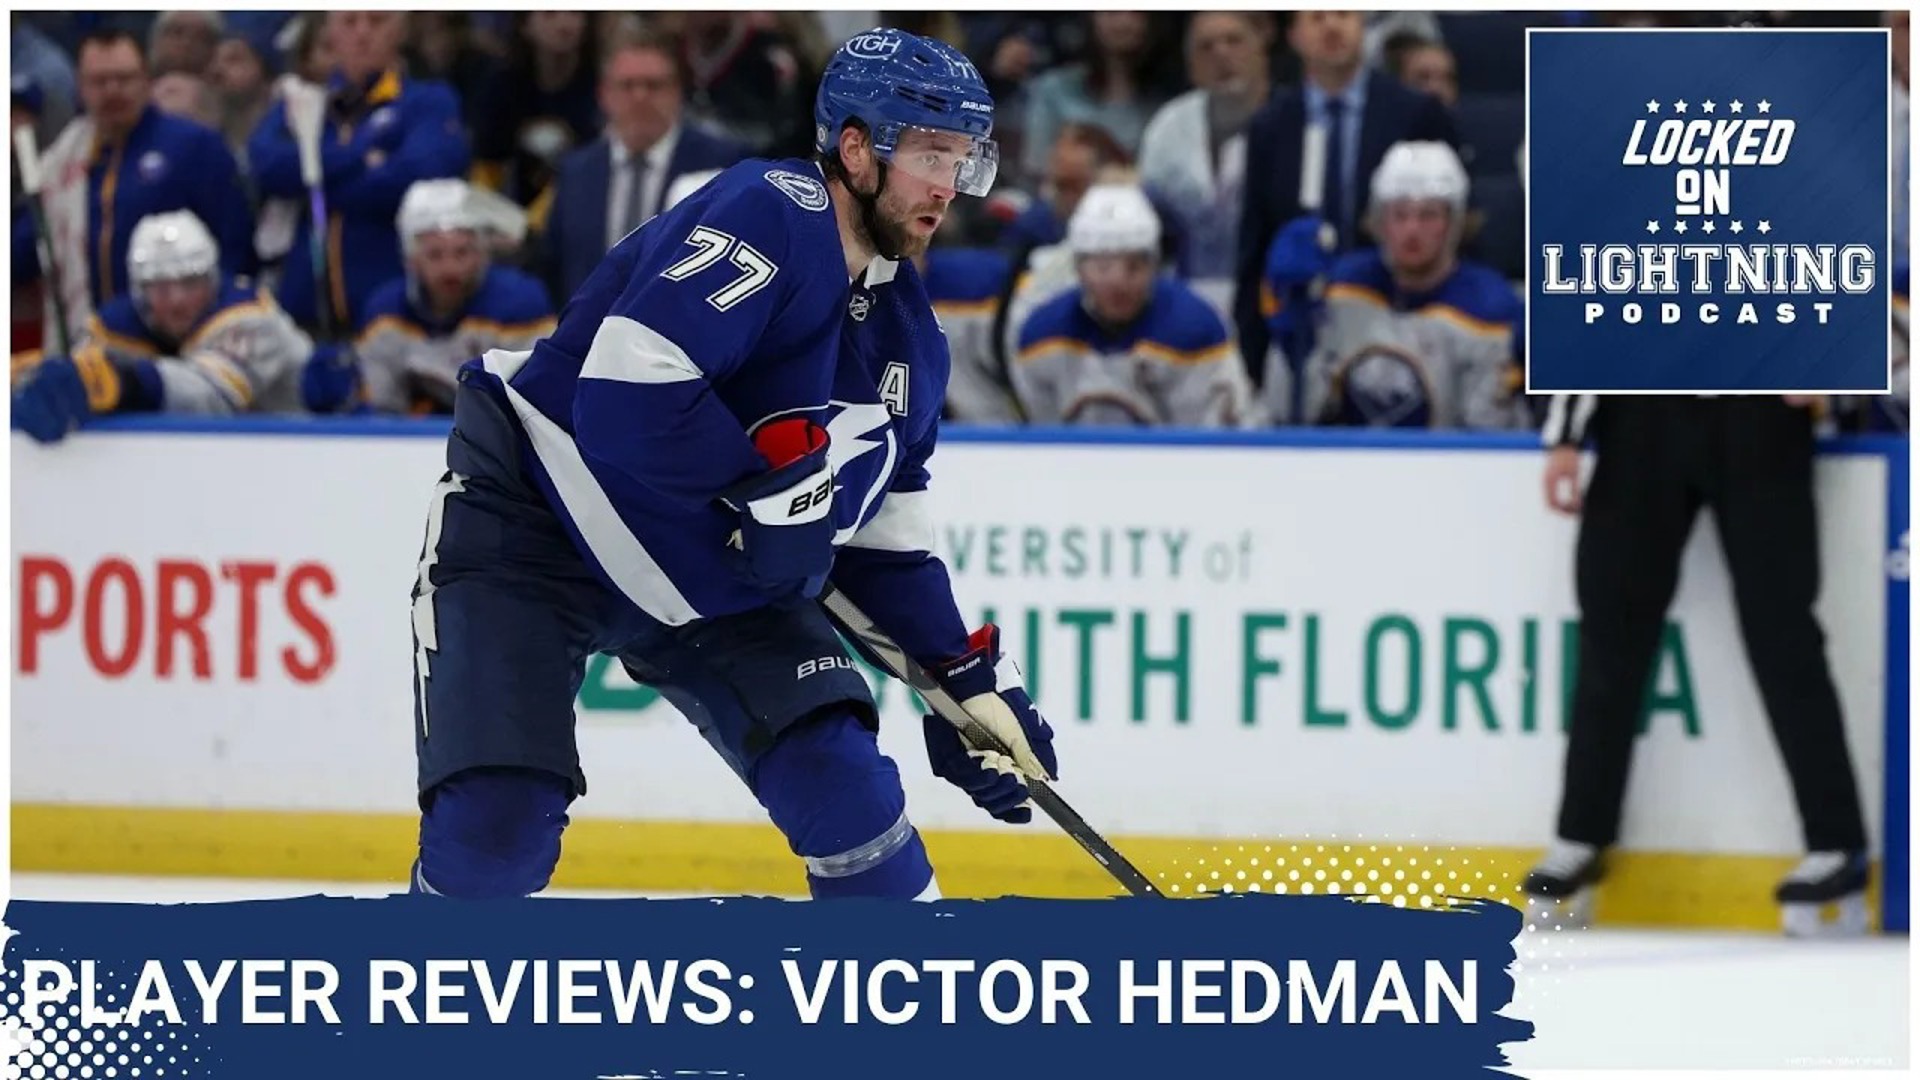 Despite struggles on defense, Victor Hedman was able to put fantastic offensive numbers. The veteran defenseman tallied 13 goals while also accumulating 76 points.